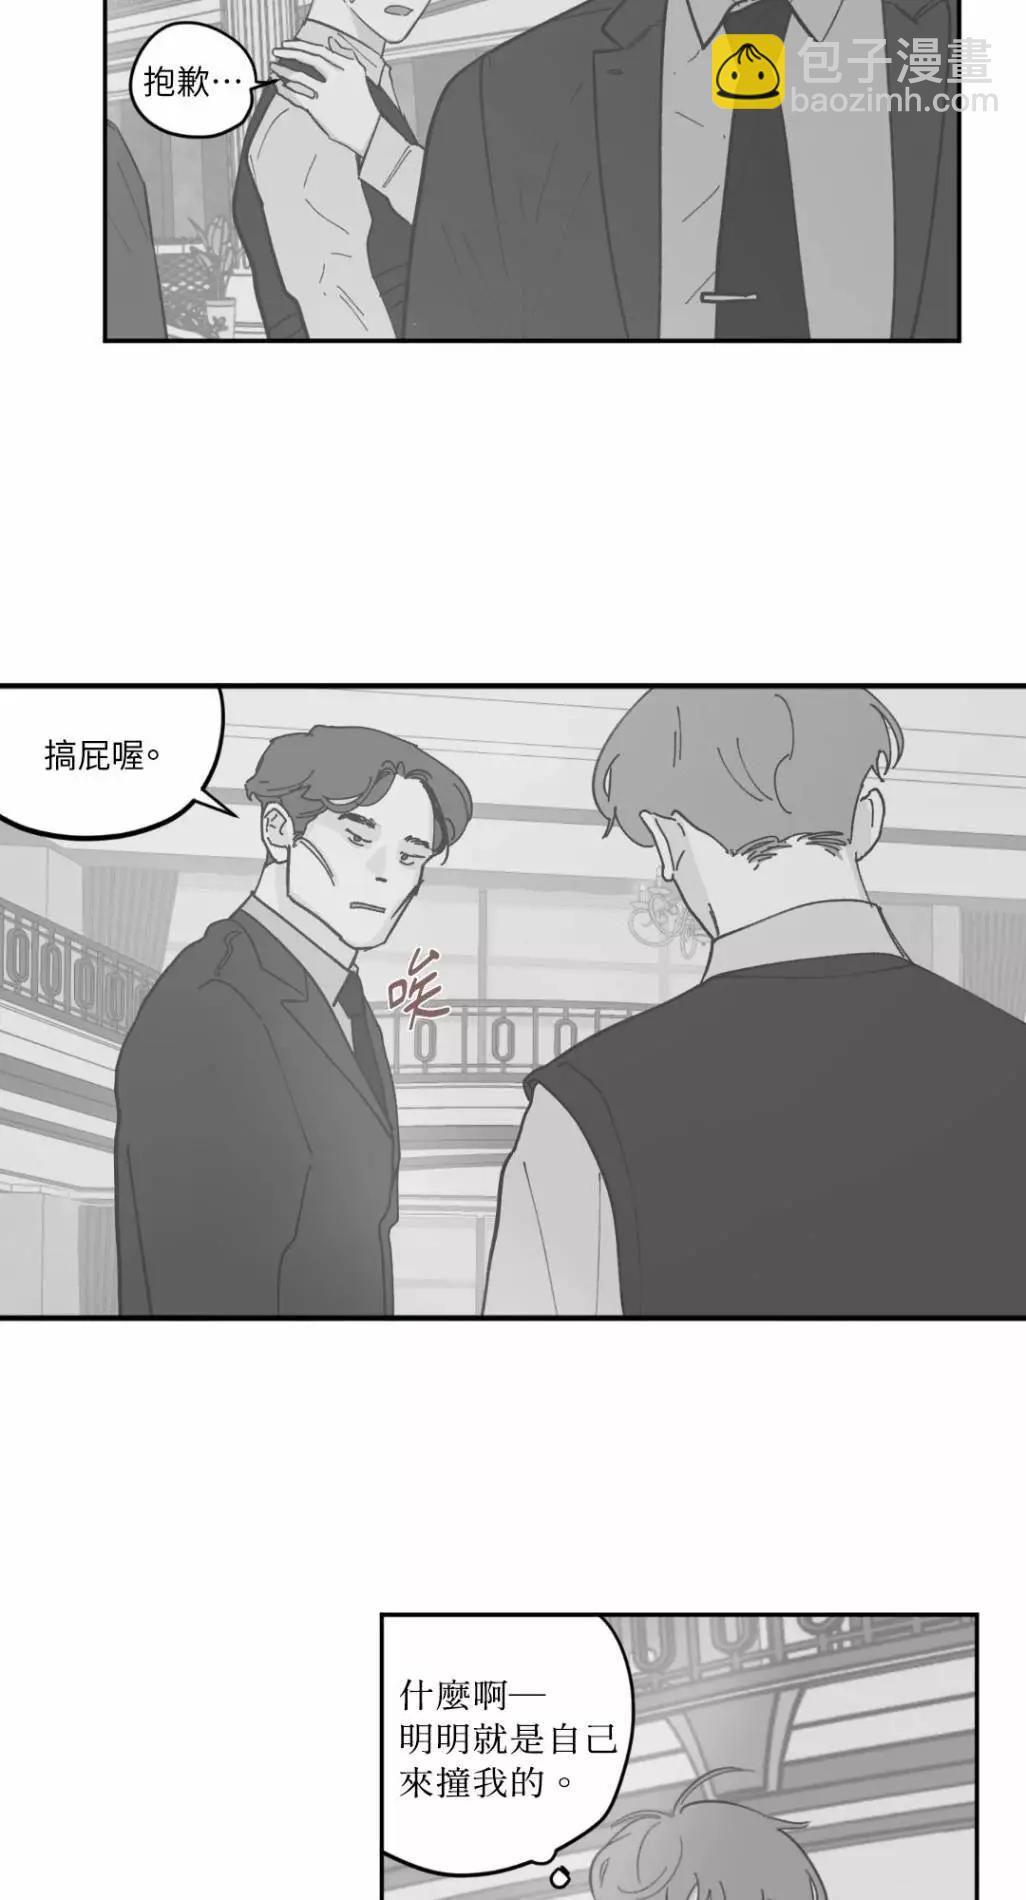 Clean Up百分百 - 第68話 - 1